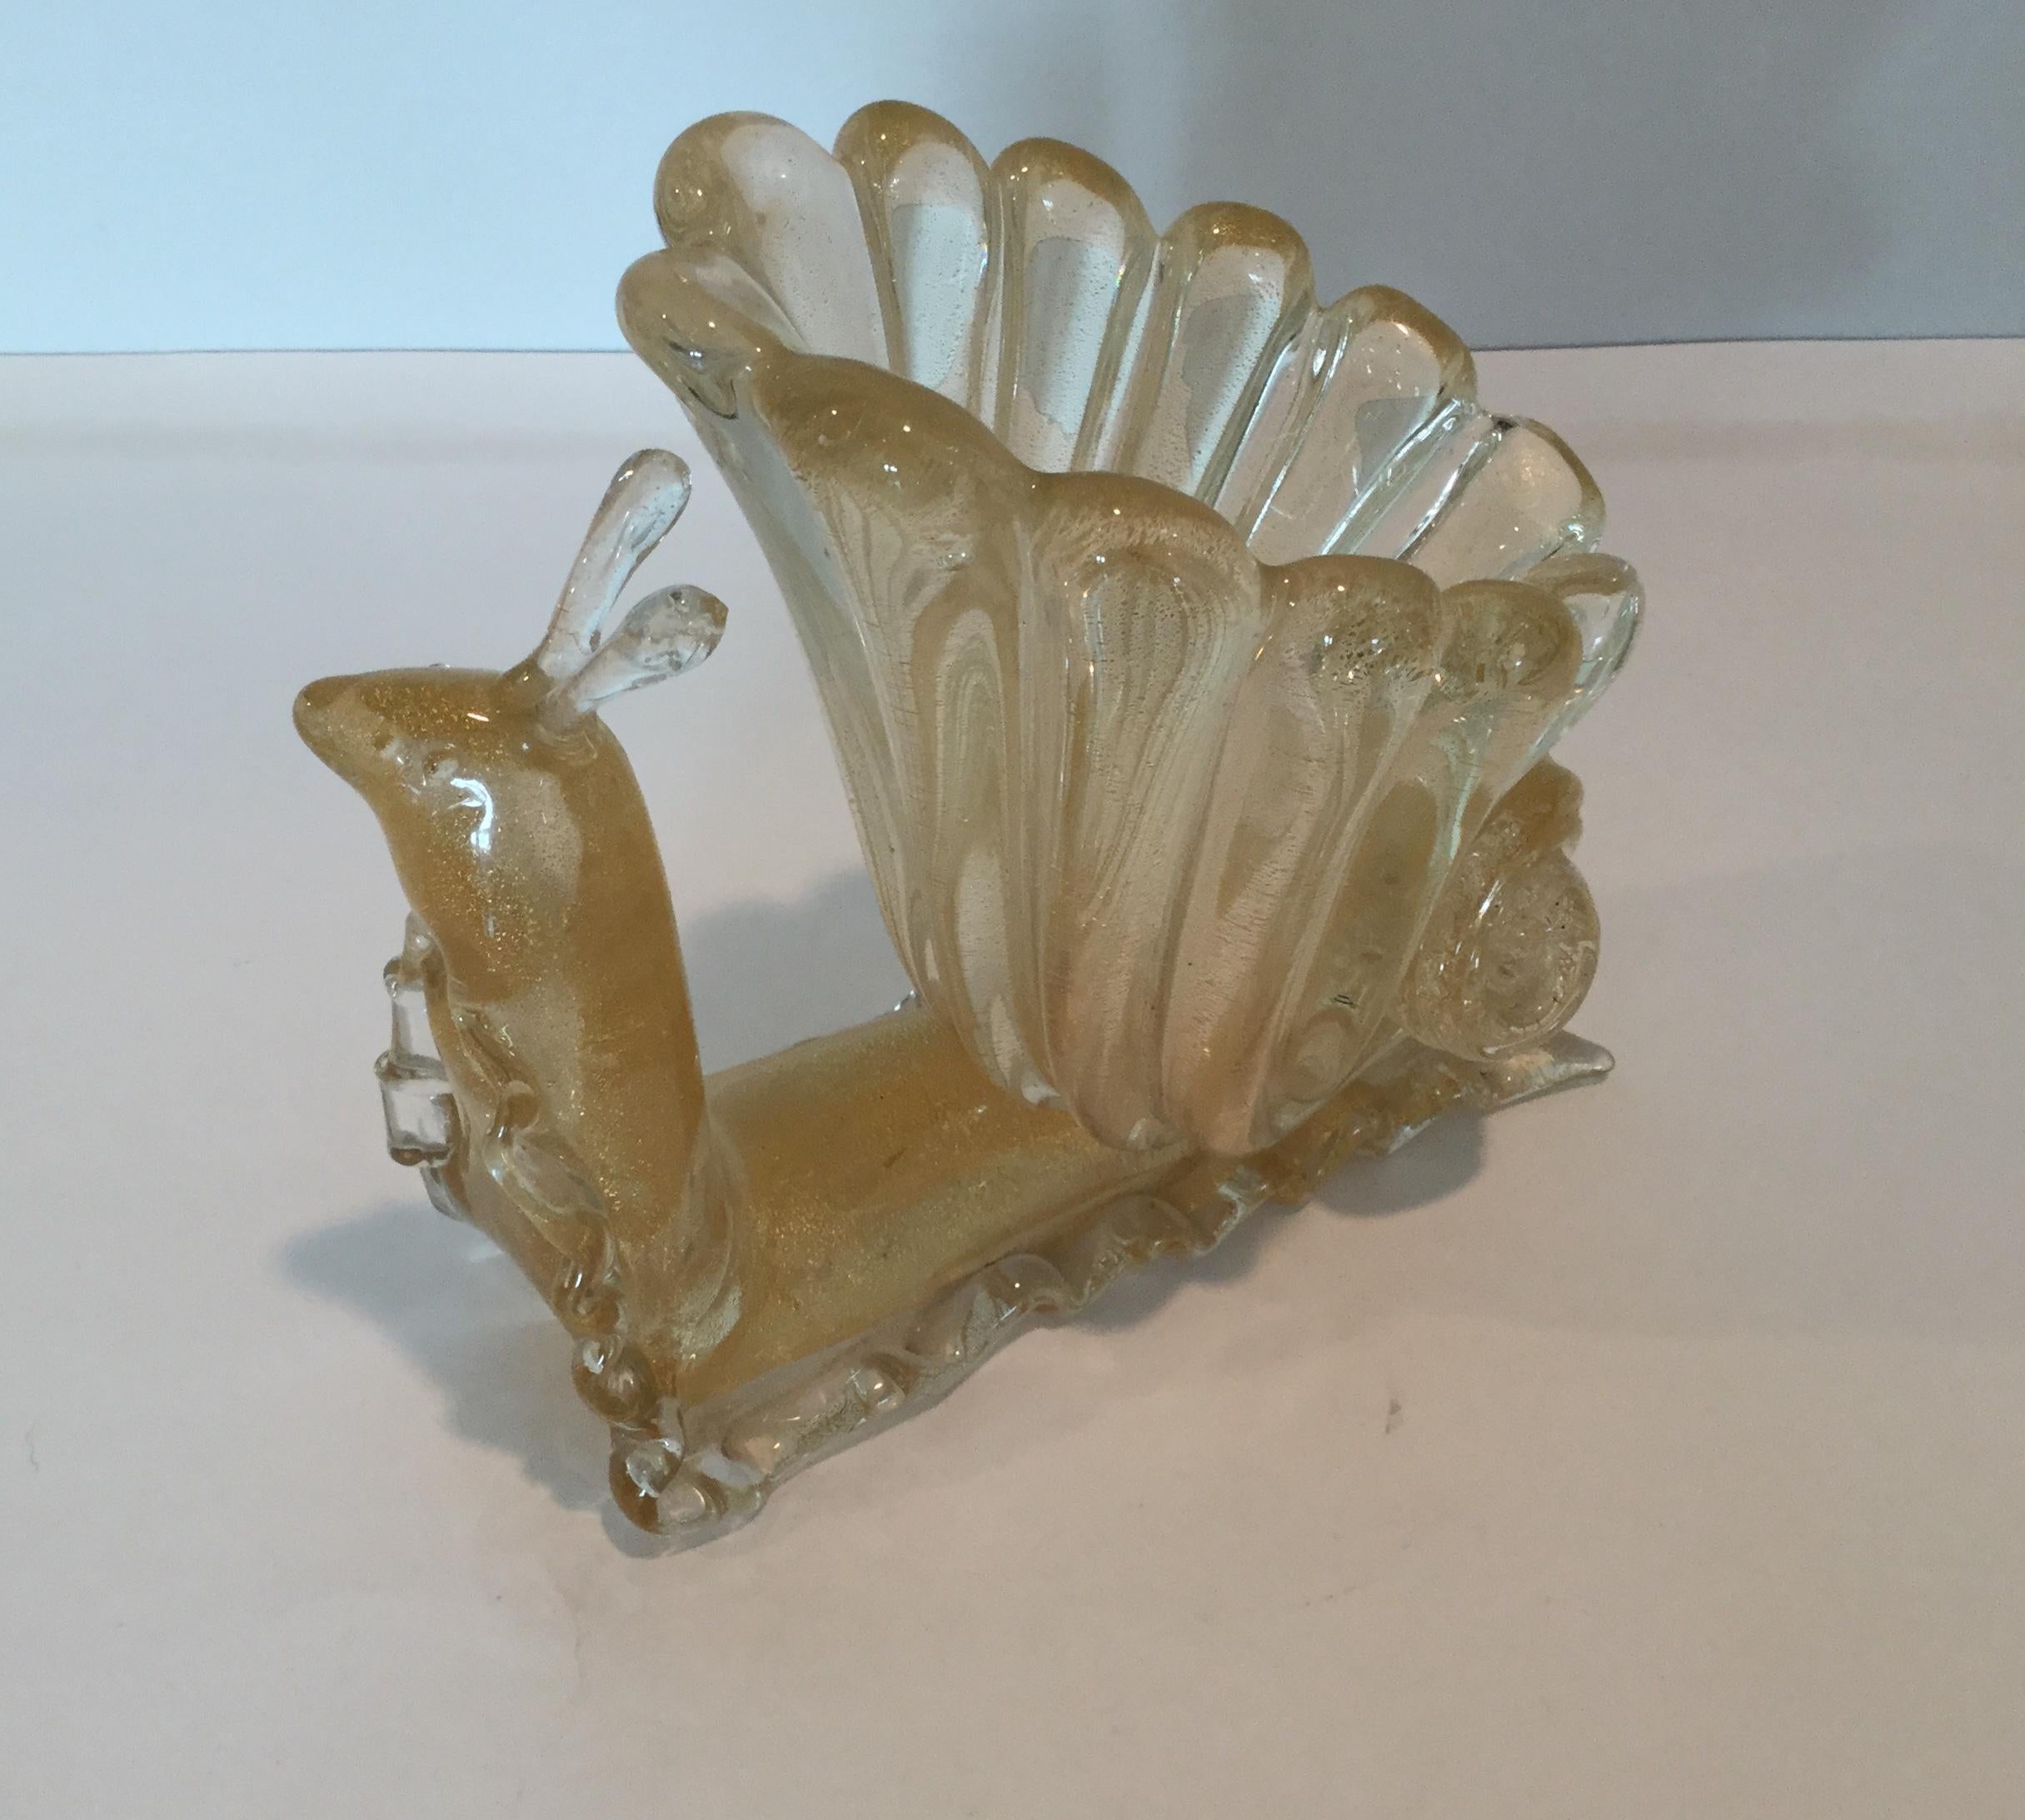 Very rare, seldom seen model 8554 Seguso Vetri D'Arte shell and snail sculpture. Do not miss your chance to own this piece. Pictures of piece in catalog with model number are attached.